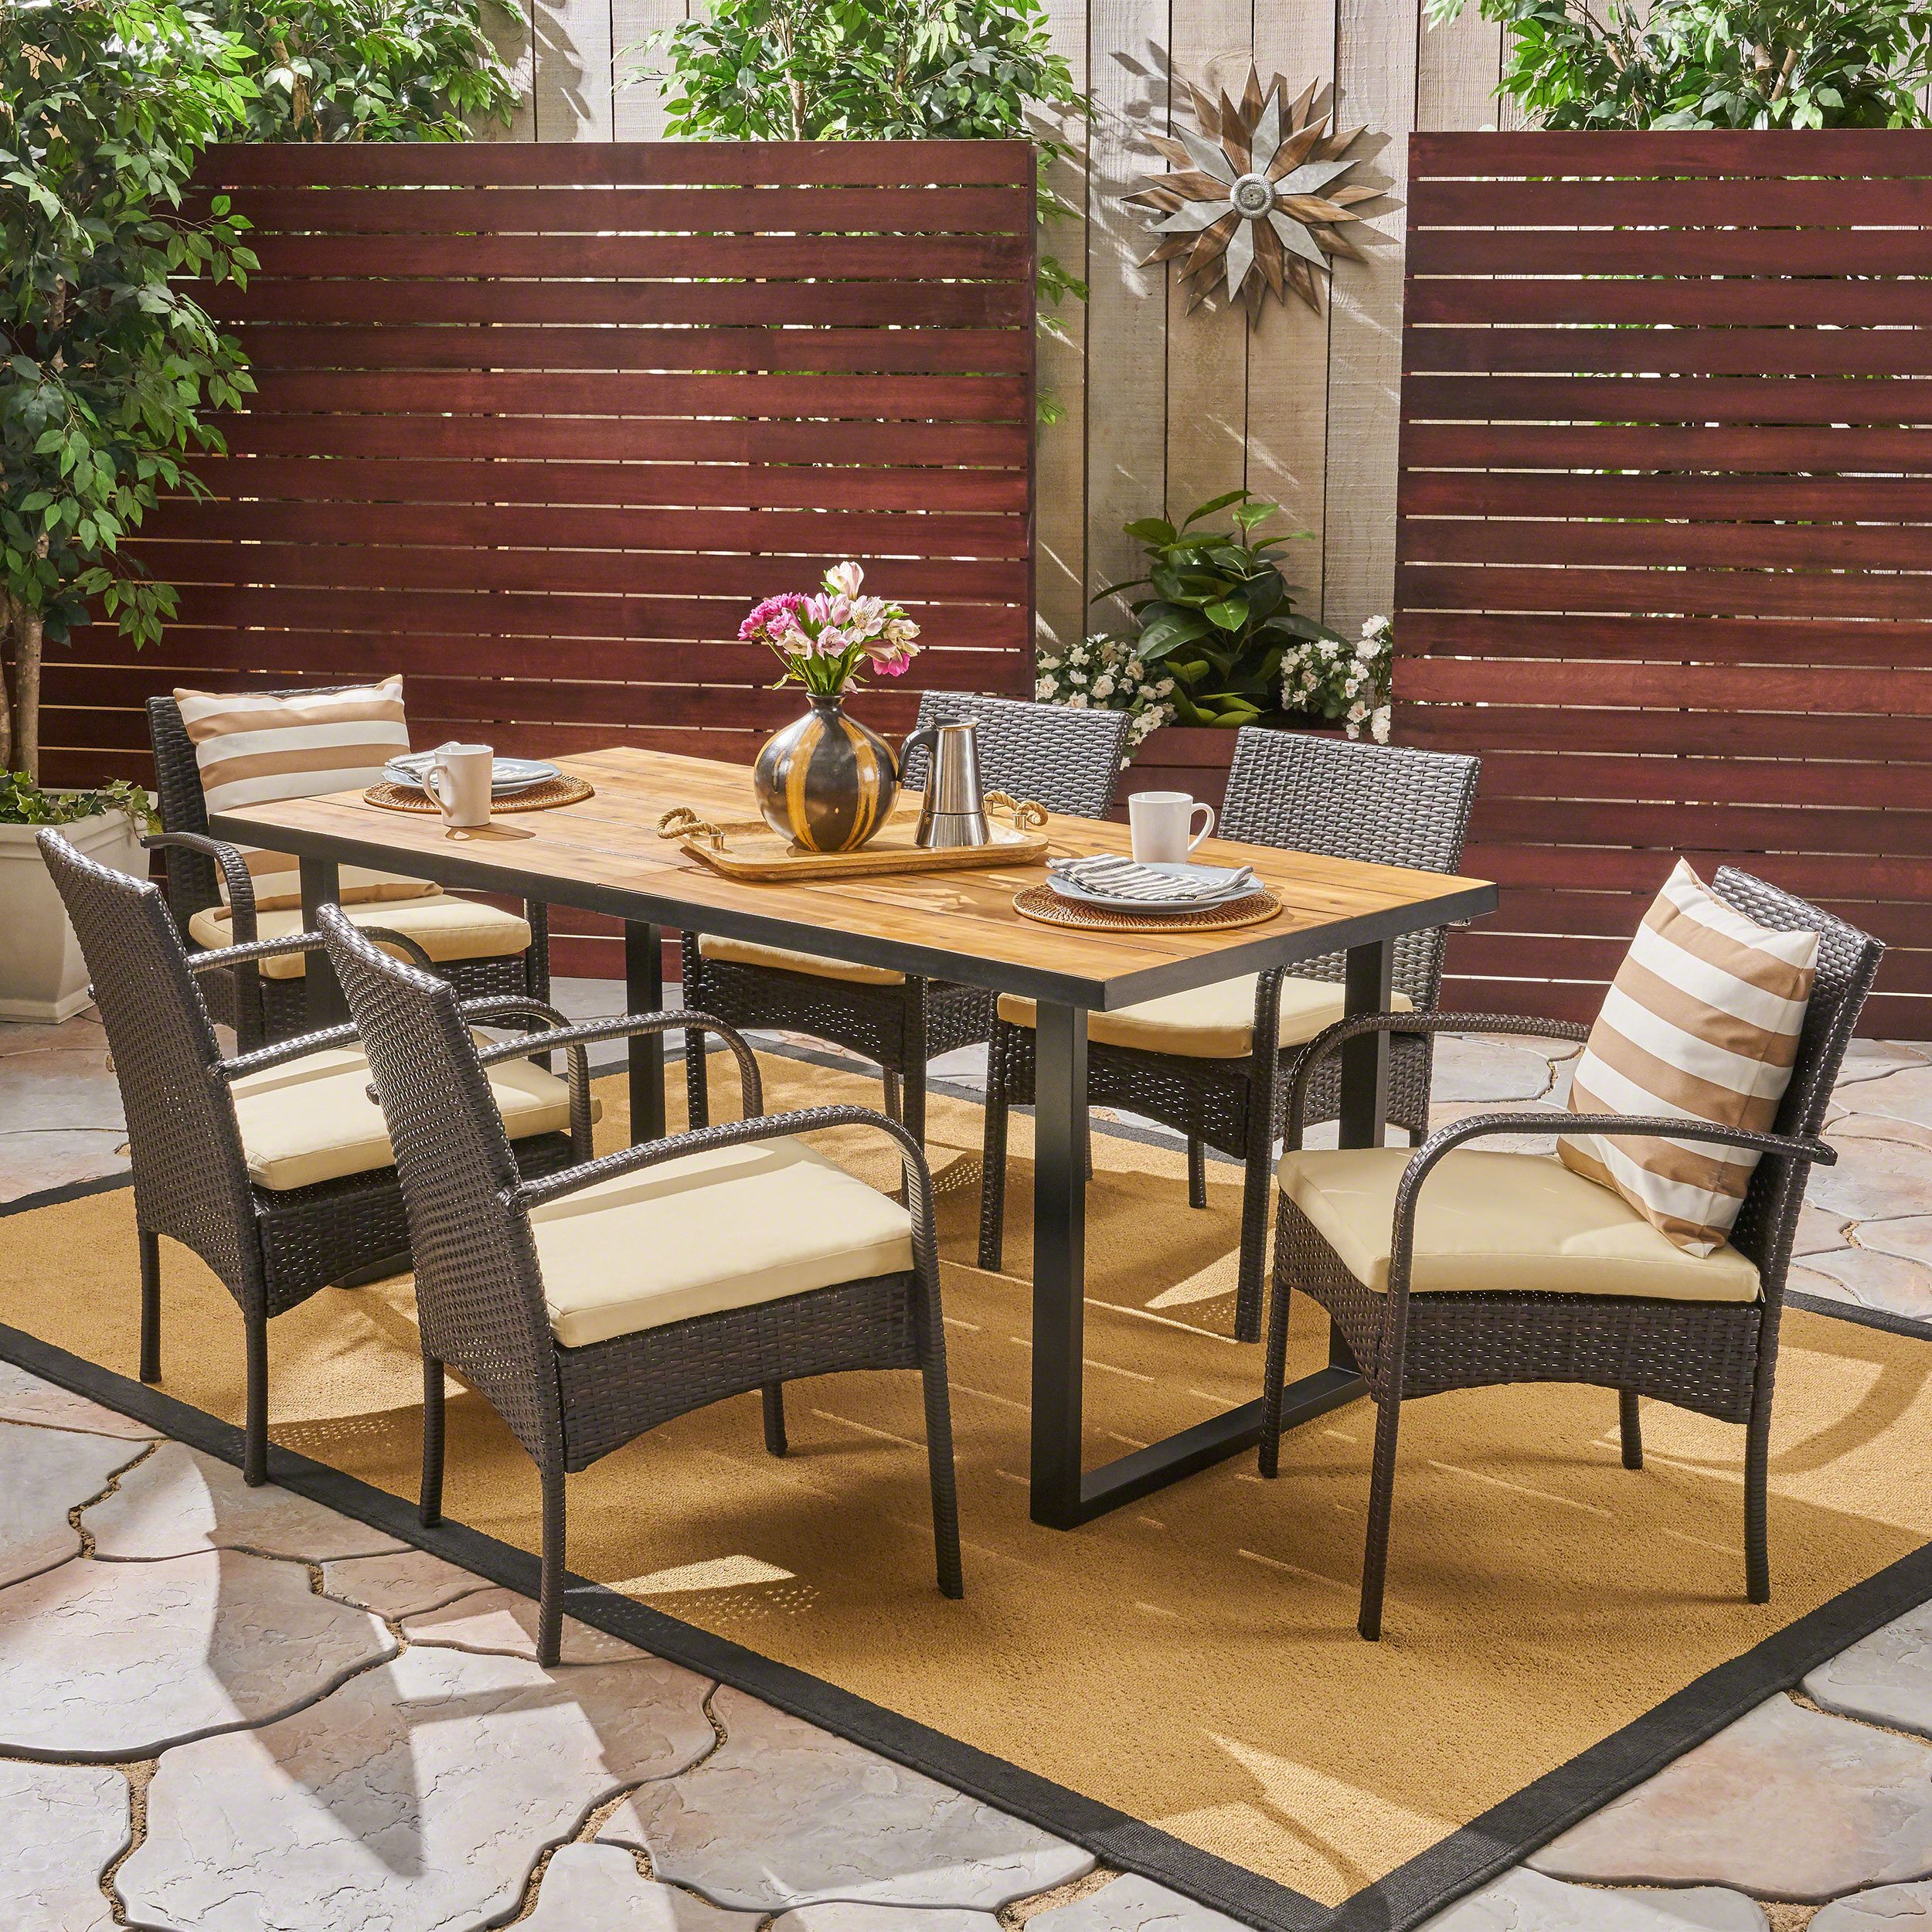 Juliet Outdoor 7 Piece Acacia Wood And Wicker Rectangular Dining Set Inside Teak And Wicker Dining Sets (View 3 of 15)